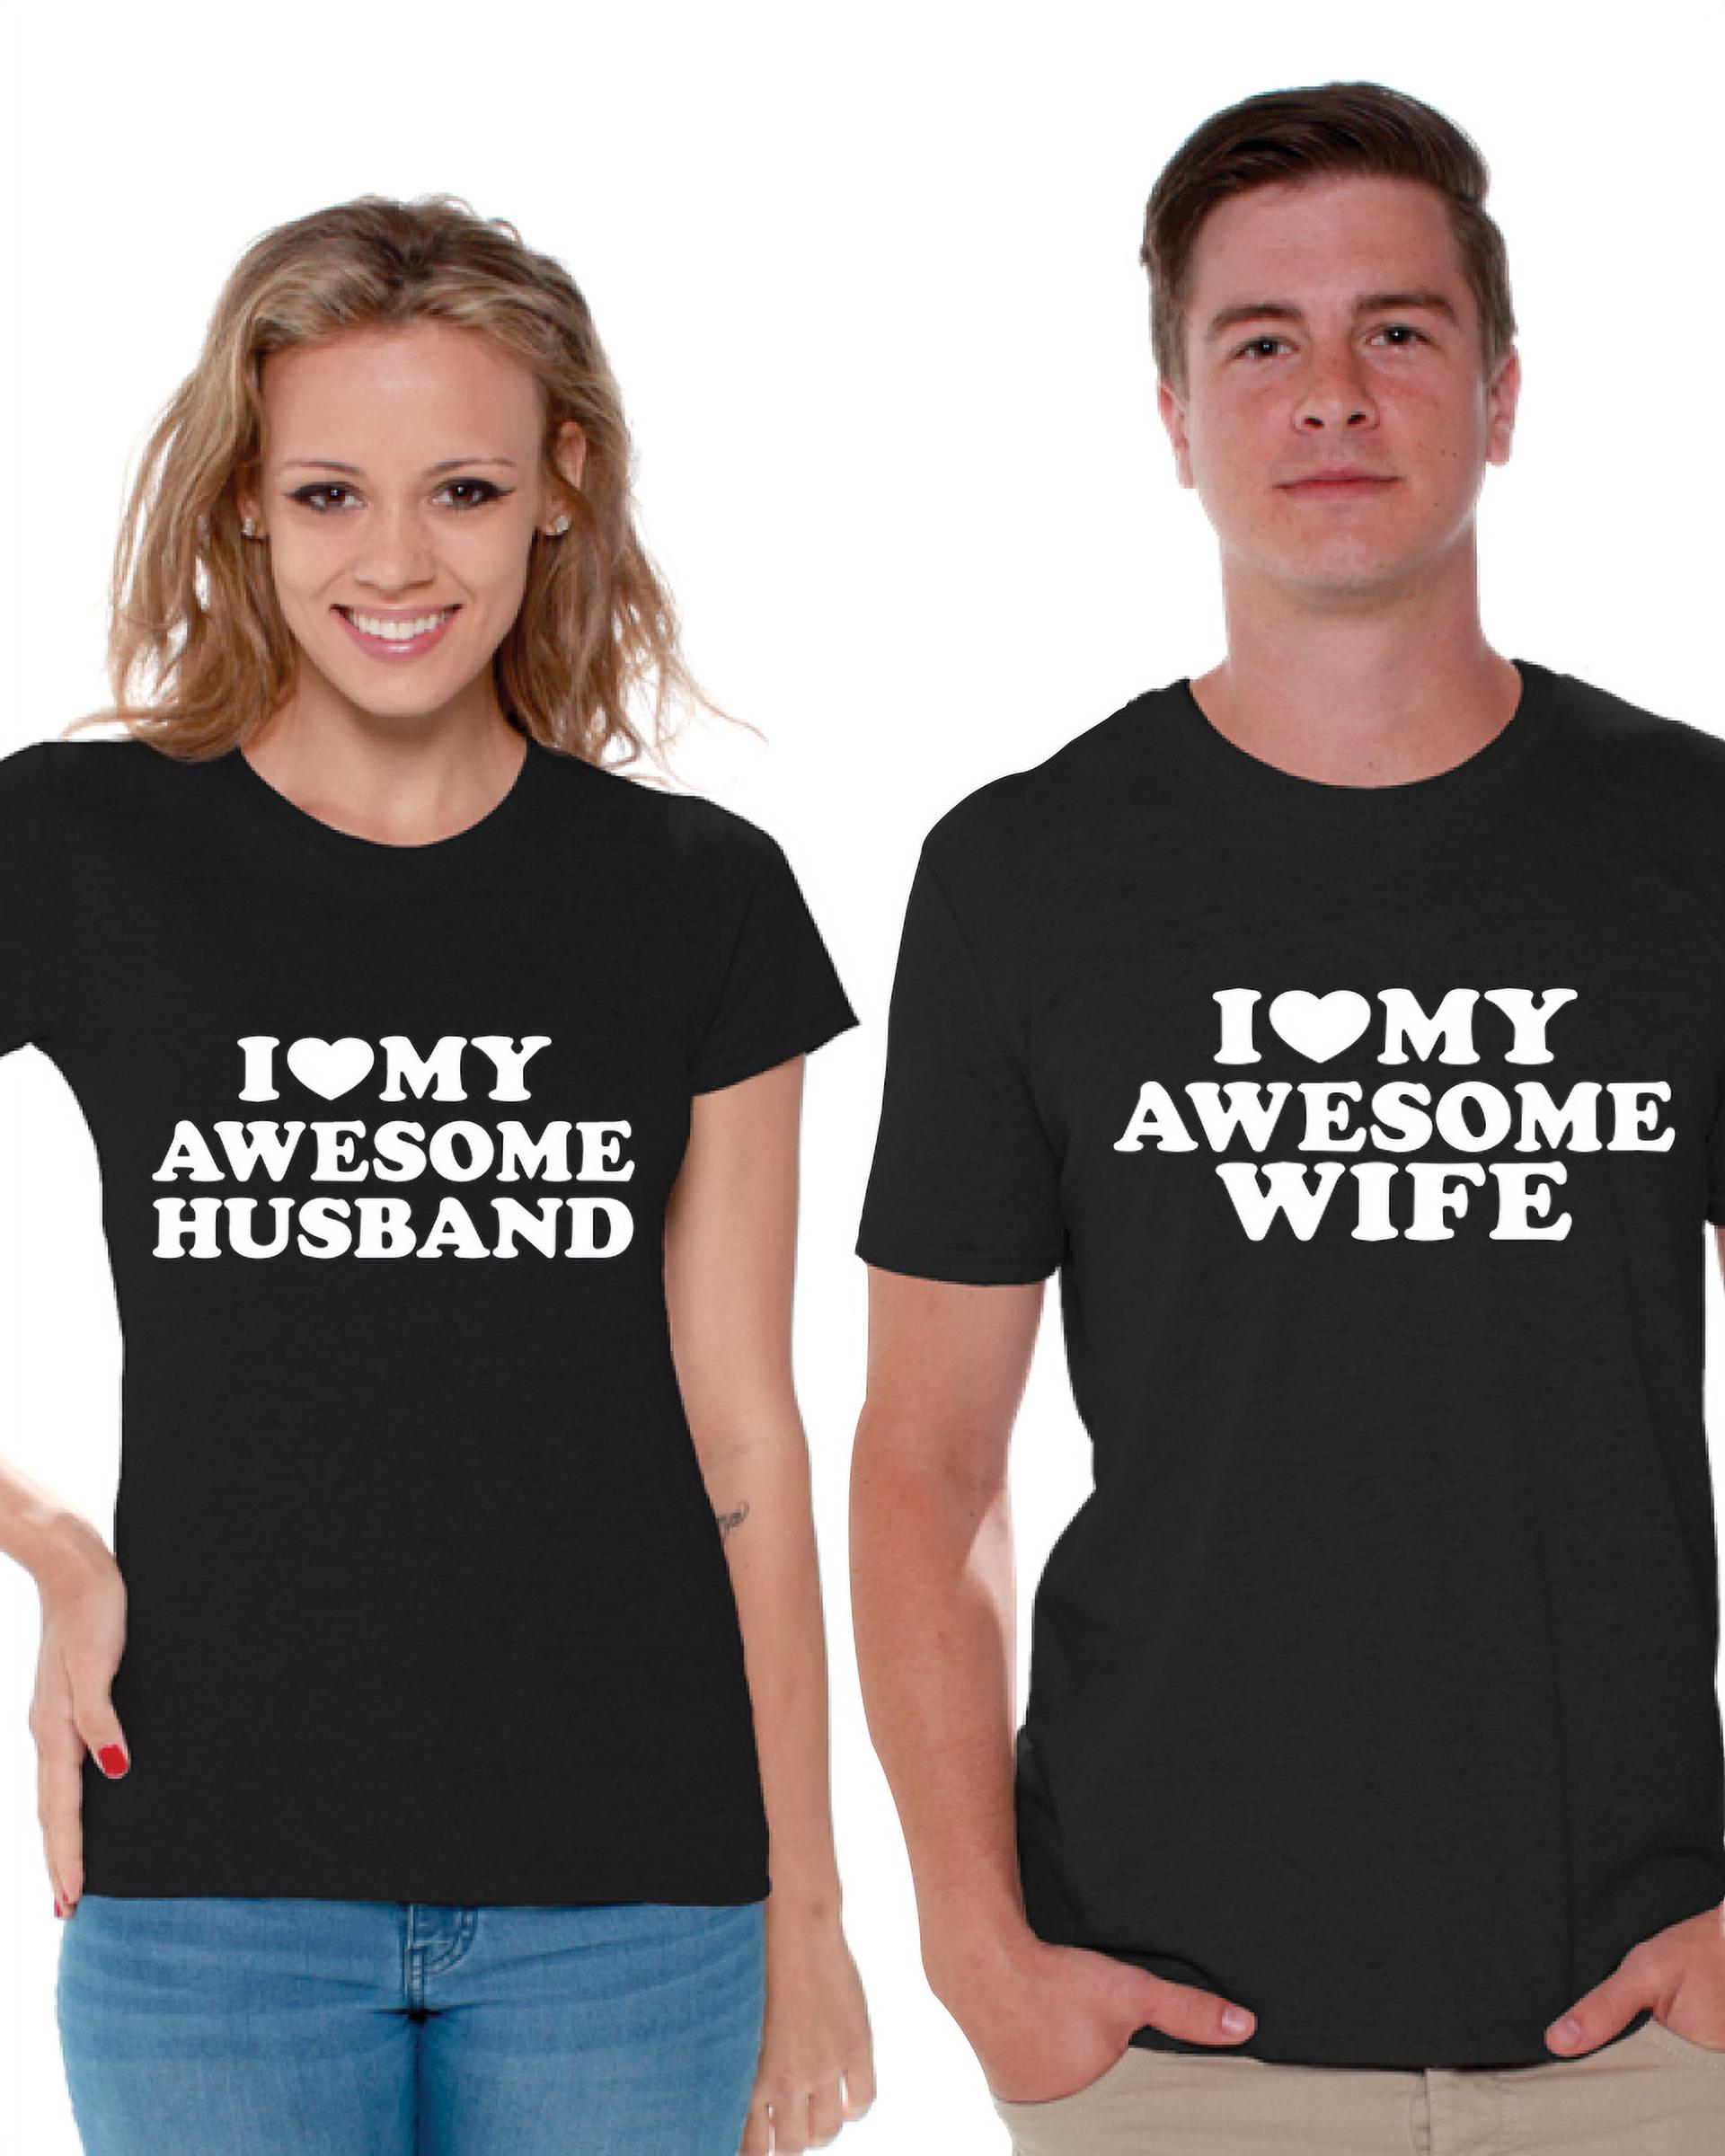 Awkward Styles Couples Matching Wife and Husband Shirts Matching Couple Shirts for Valentine's Day I Love My Awesome Husband Shirt I Love My Awesome Wife T Shirt for Couples Cute Anniversary Gifts - image 1 of 5